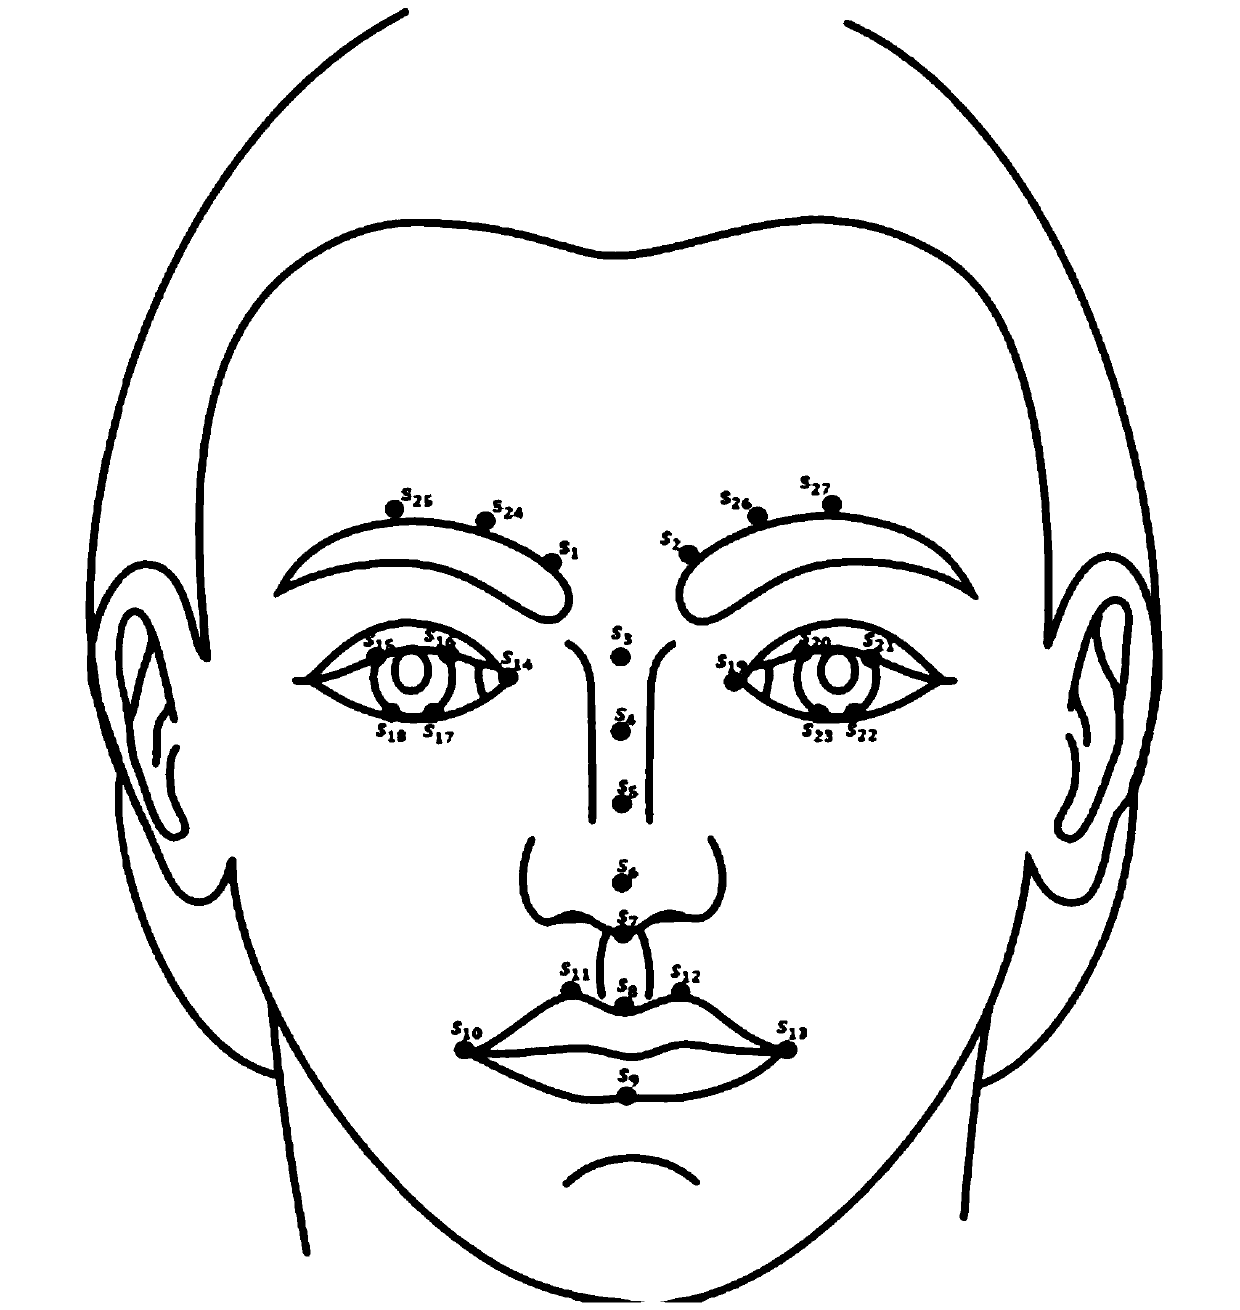 Accurate facial paralysis degree evaluation method and device based on H-B grading under CV